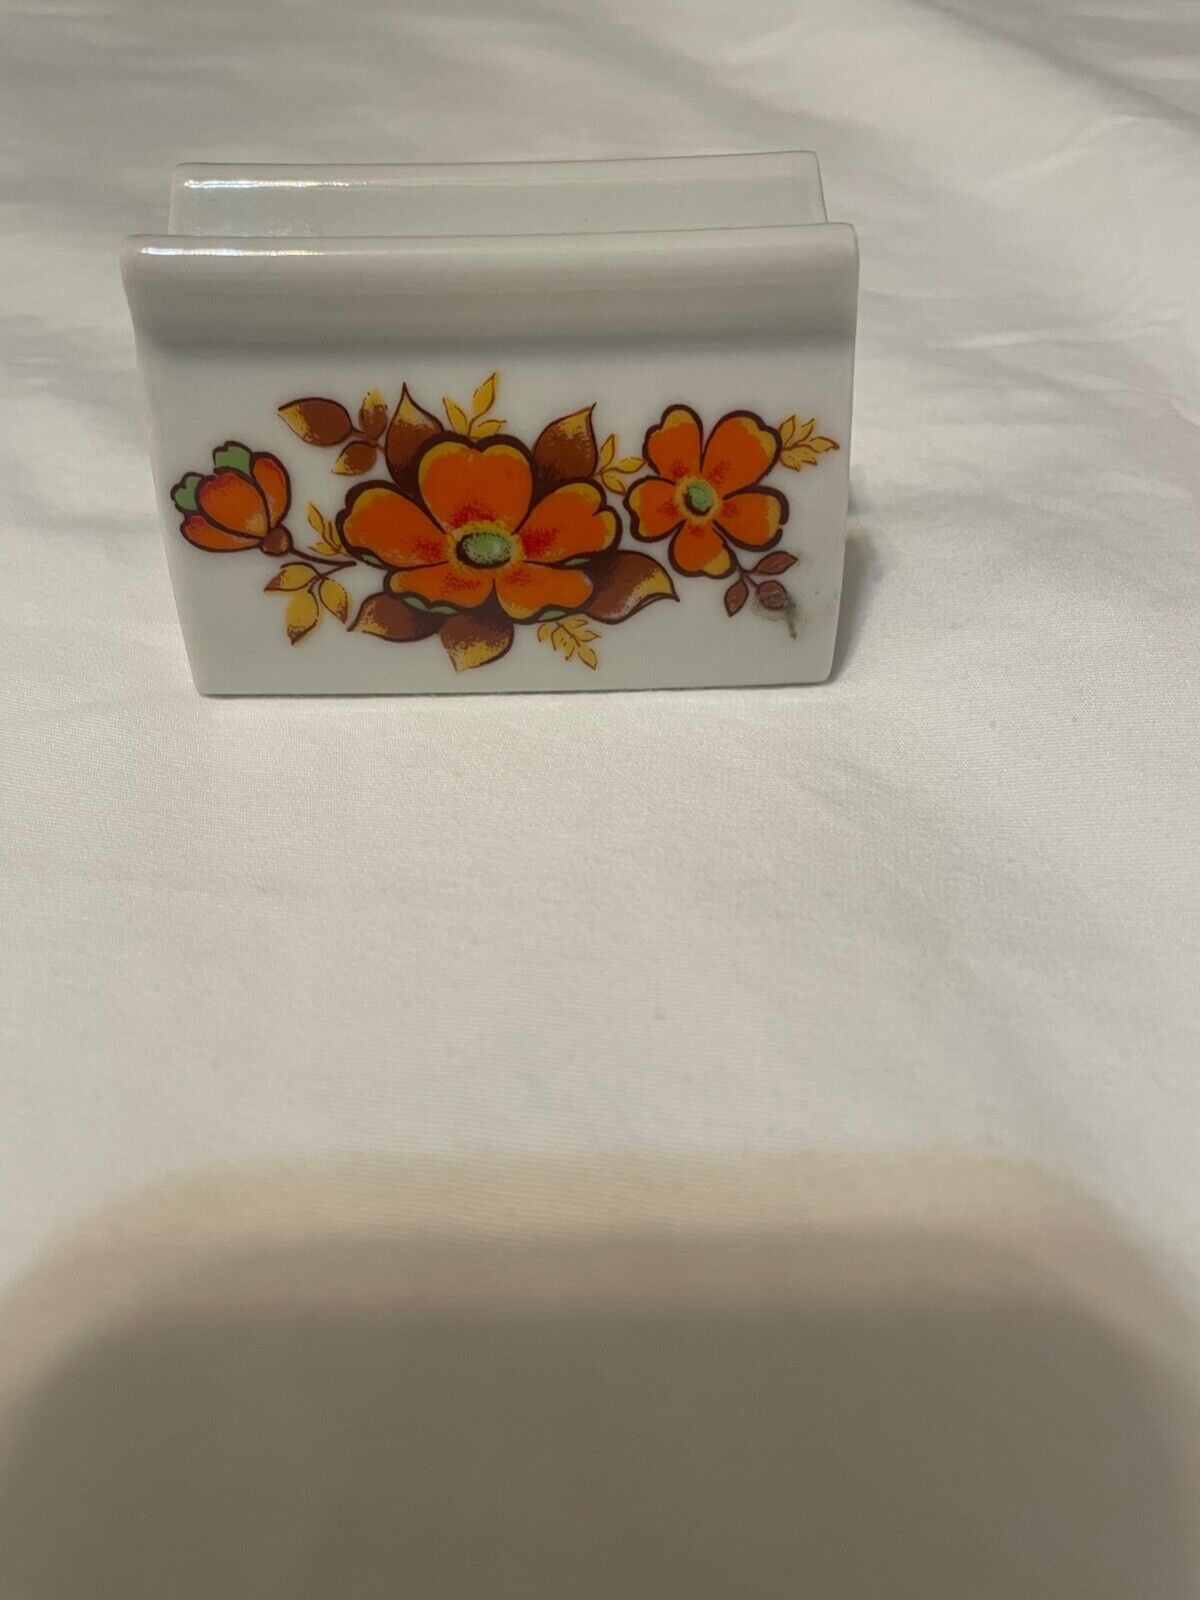 Vintage The Indispensable Dispenser Toothpaste Holder-Made In W Germany Florals